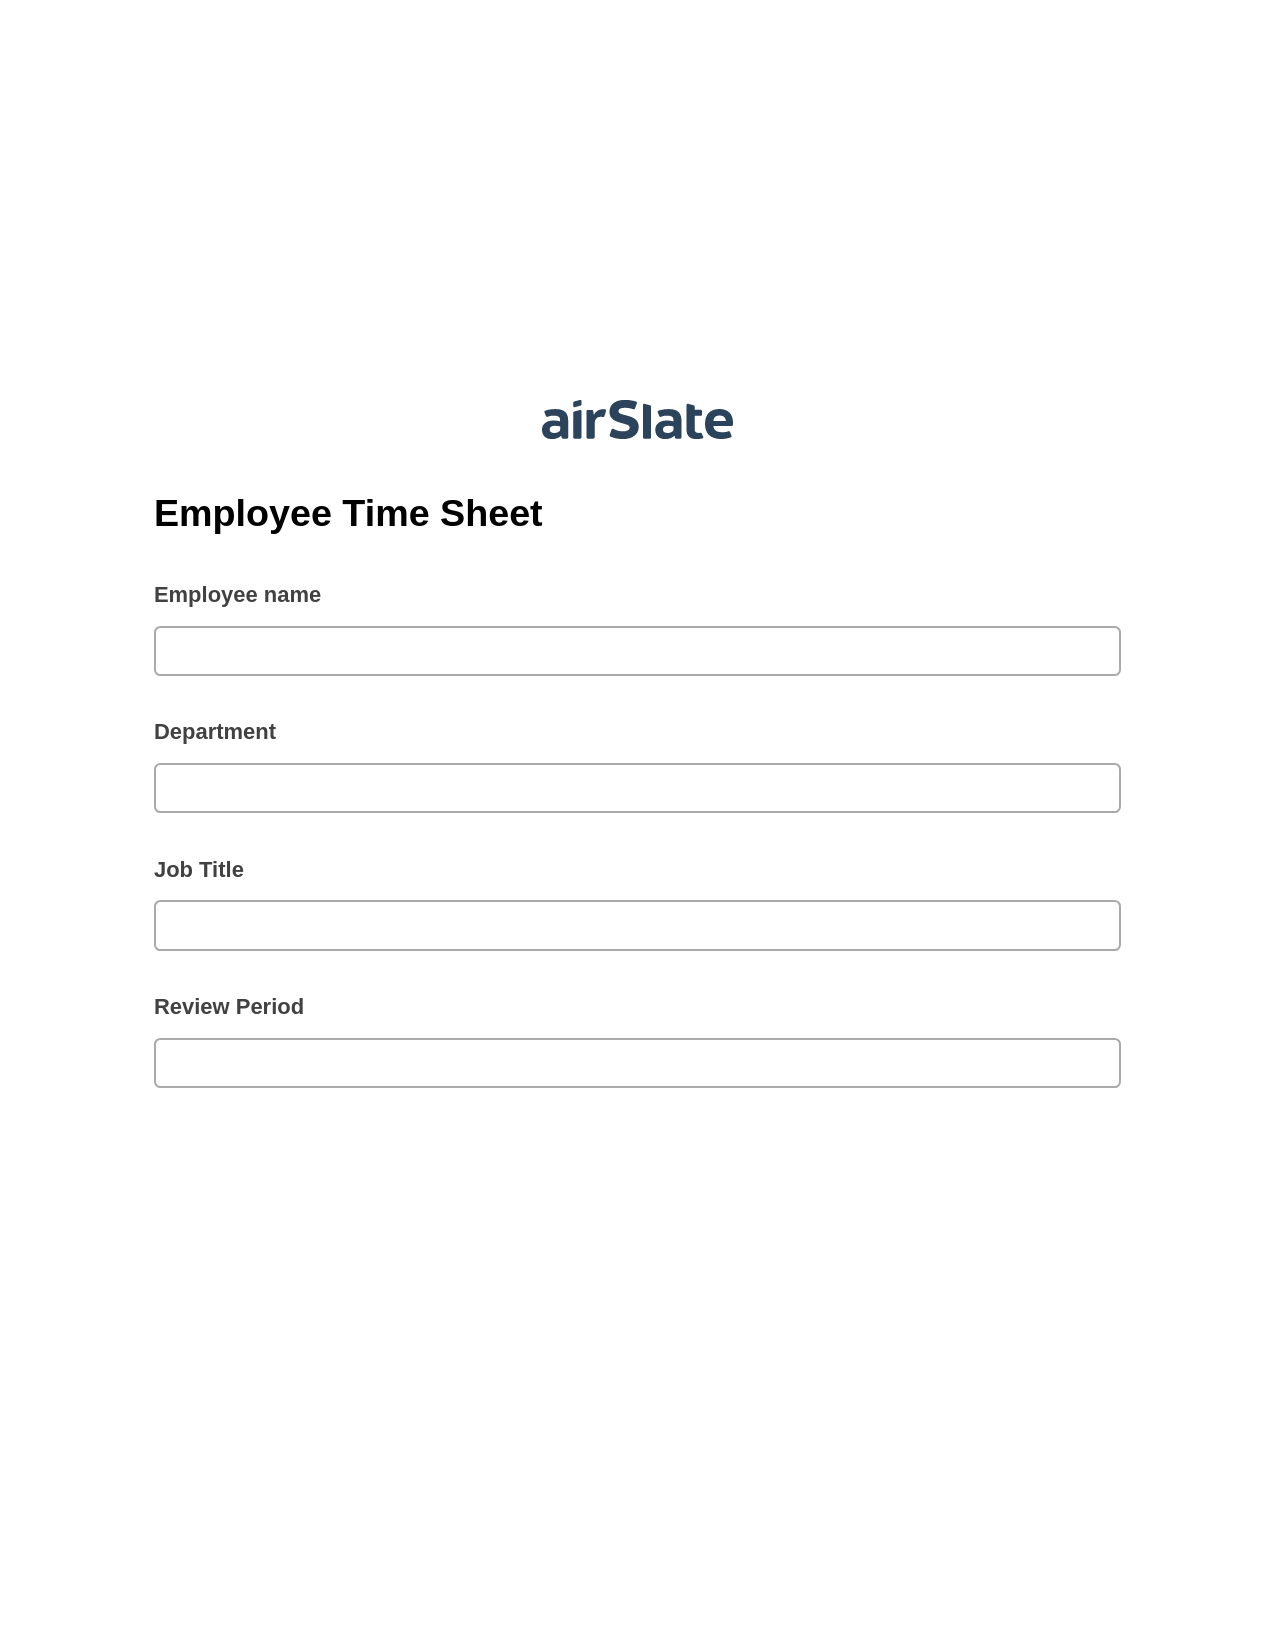 Employee Time Sheet Pre-fill from Excel Spreadsheet Bot, Create Salesforce Records Bot, Post-finish Document Bot